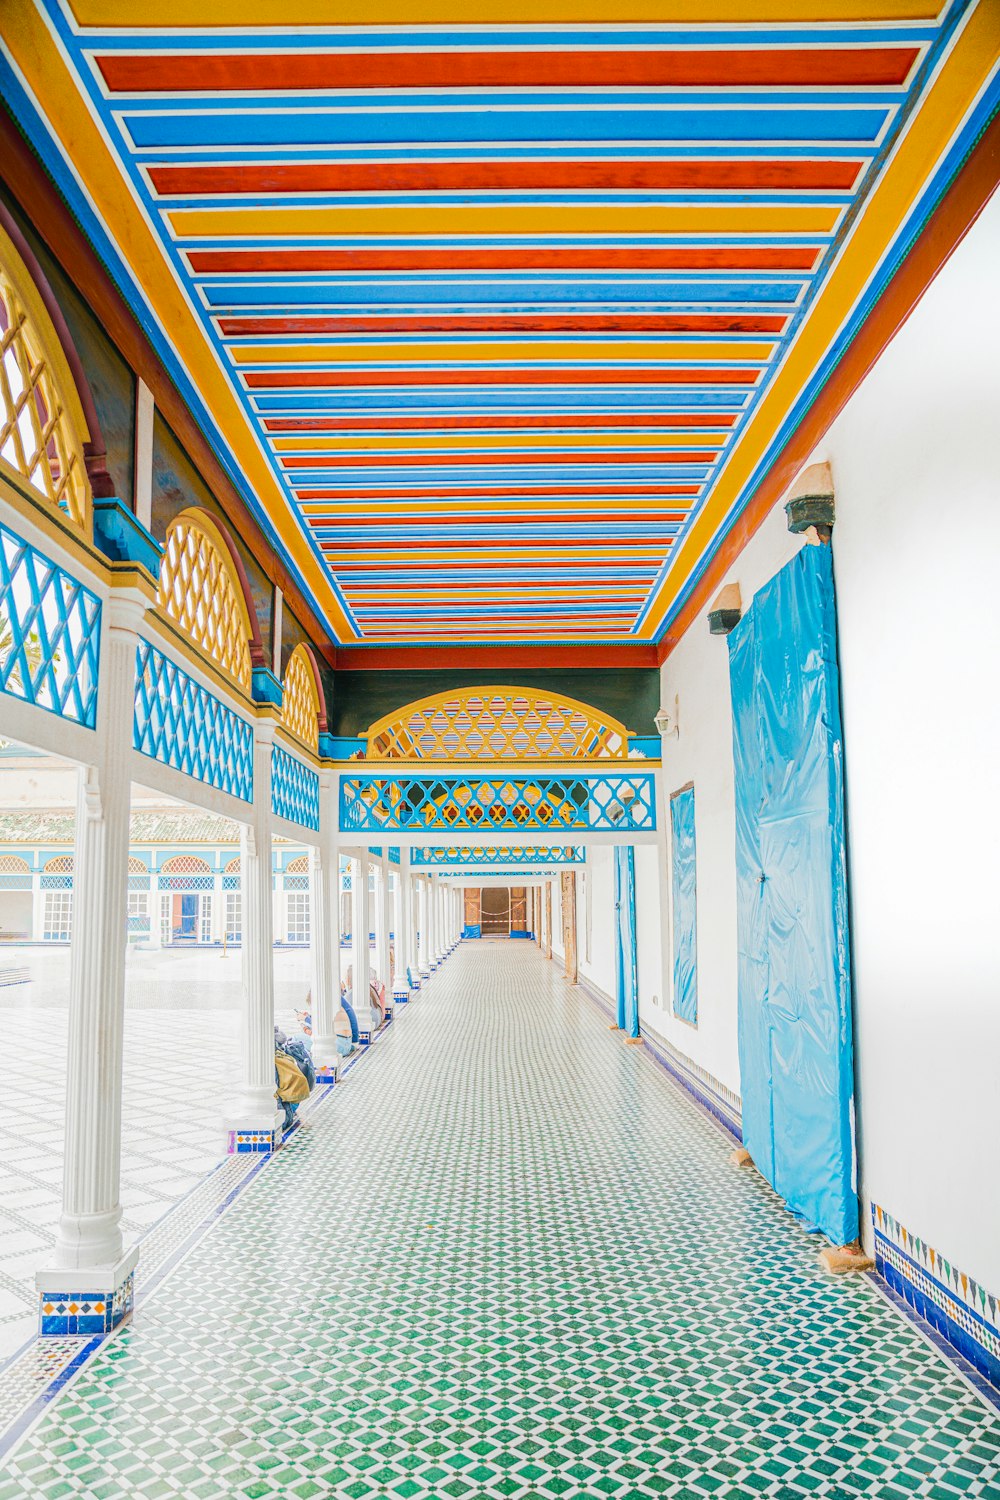 a hallway with a tiled floor and colorful ceiling